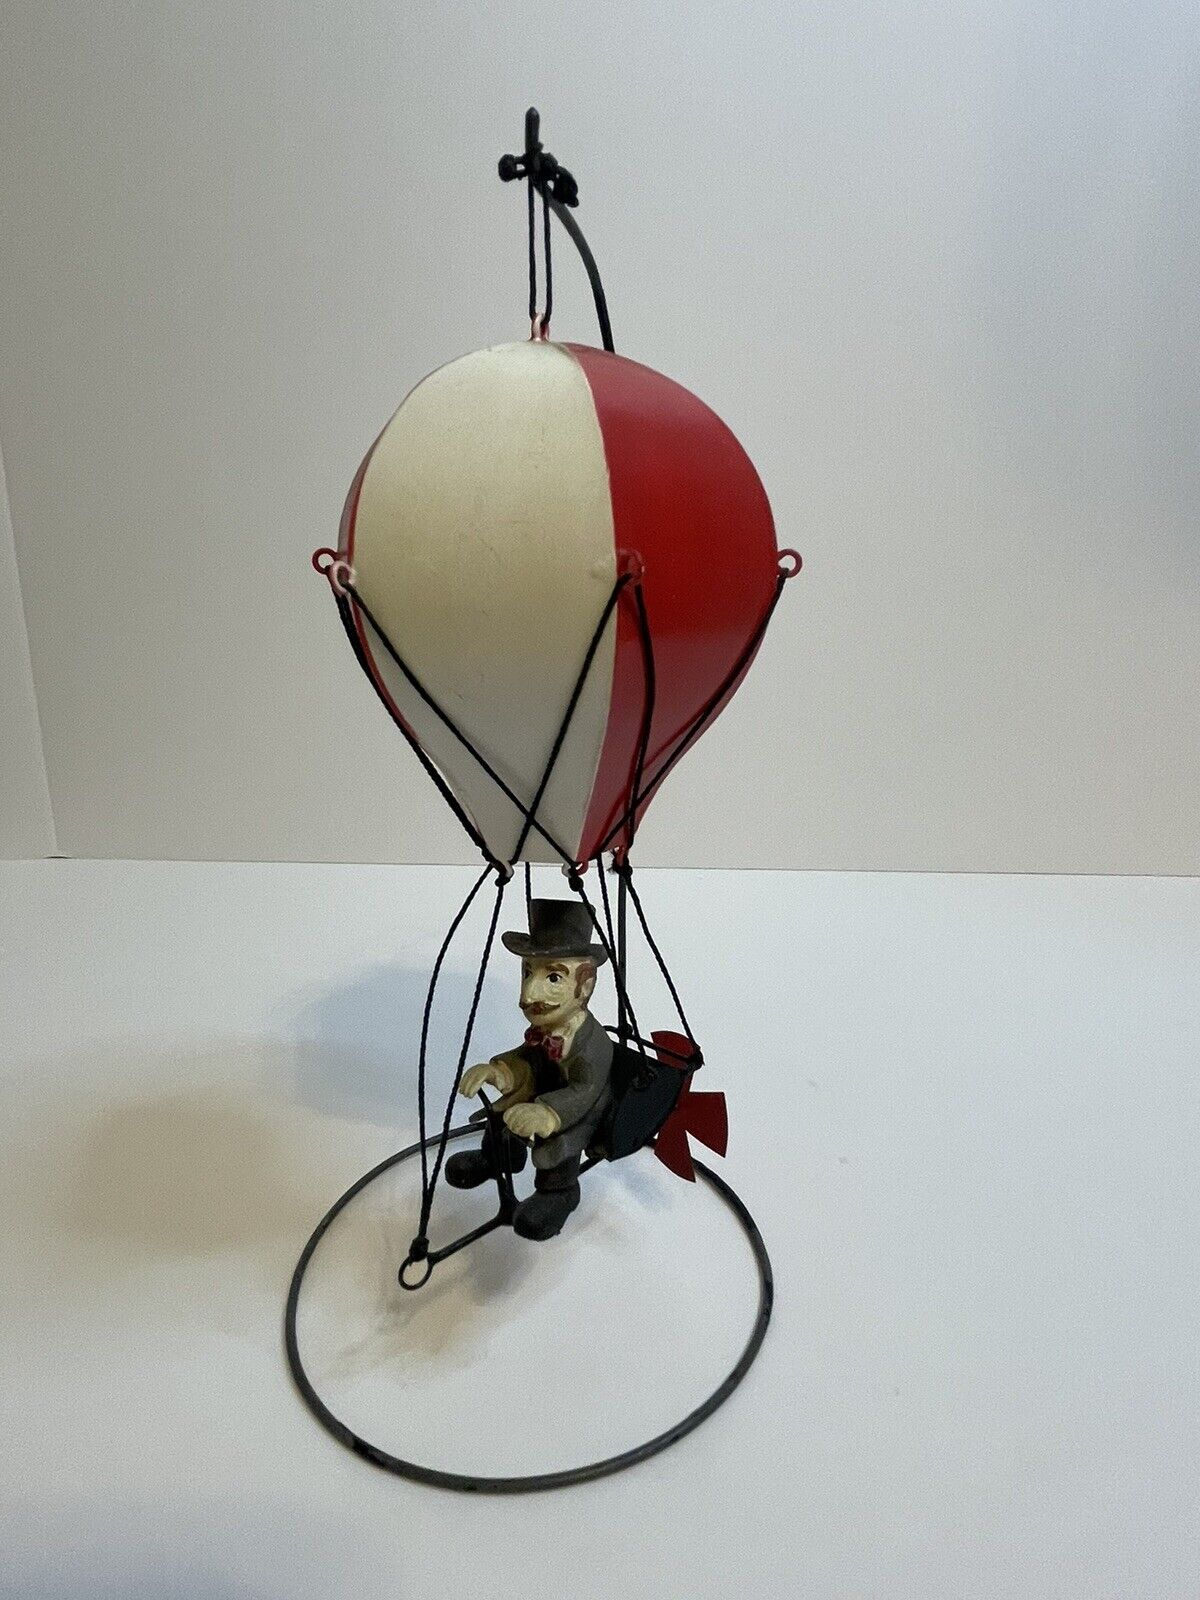 Vintage Hanging Pedal Air Balloon Decoration, Handmade in Phillipines